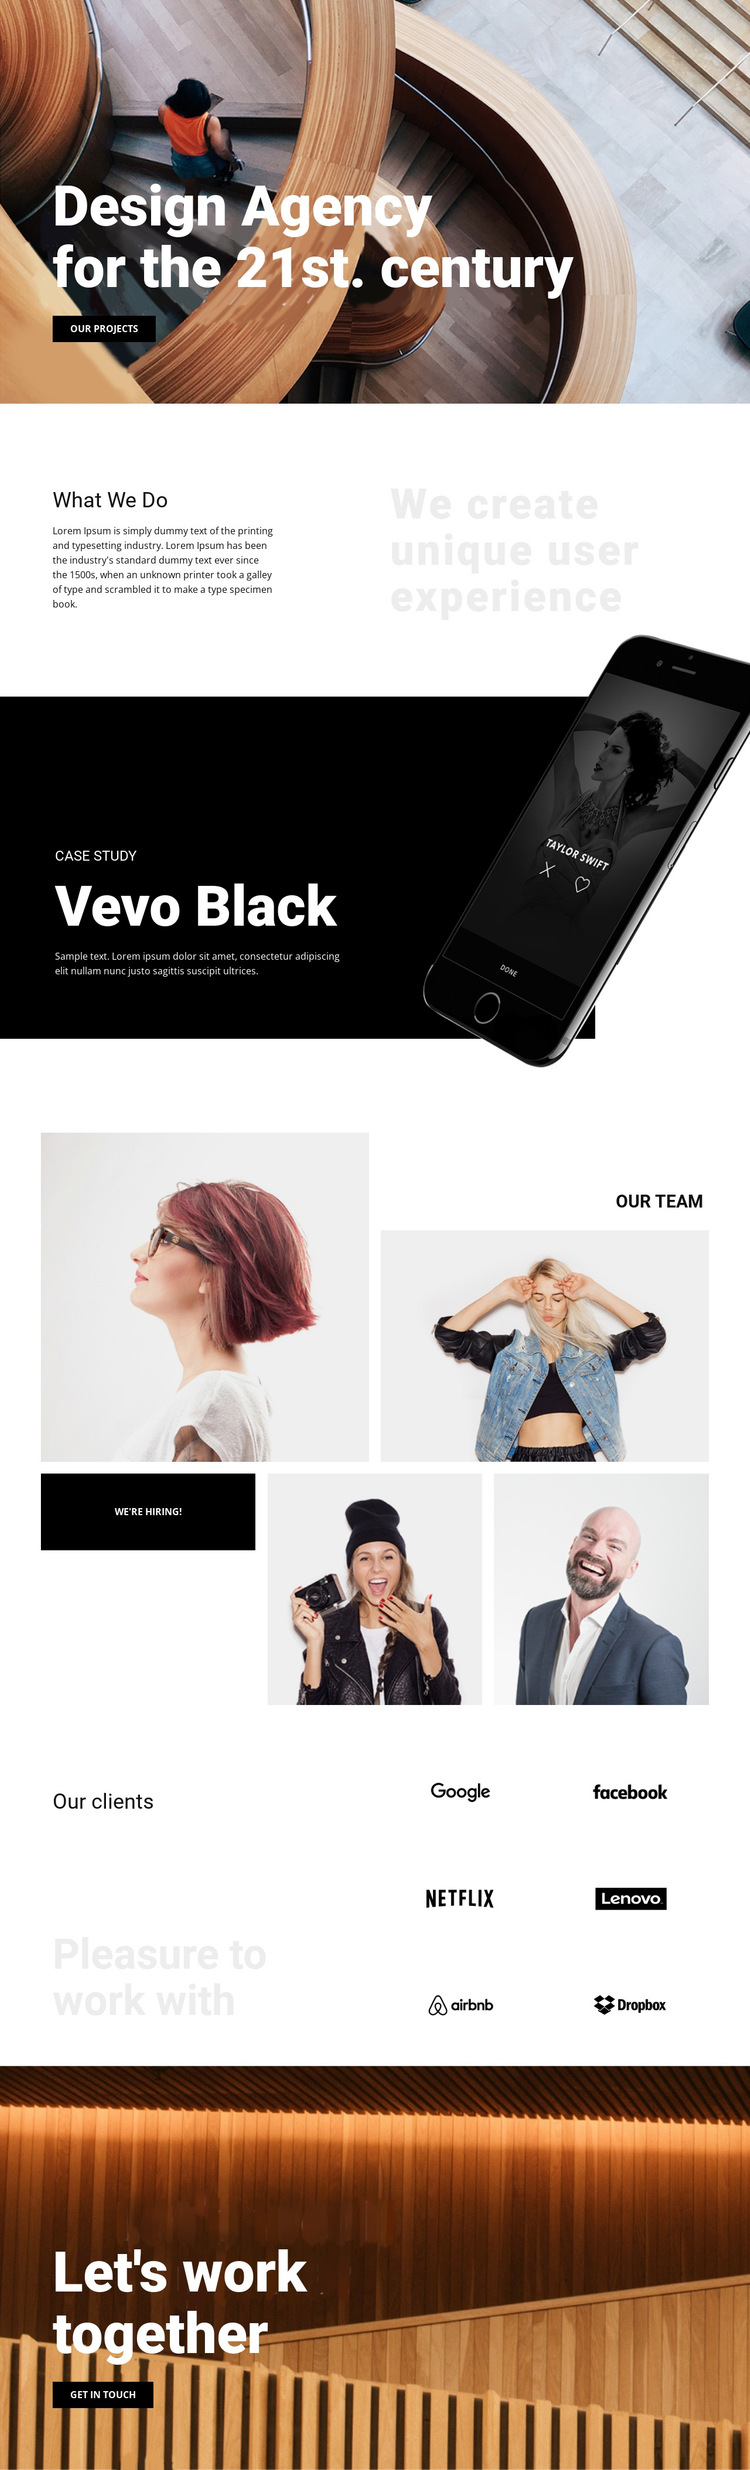 Our work is your success HTML5 Template